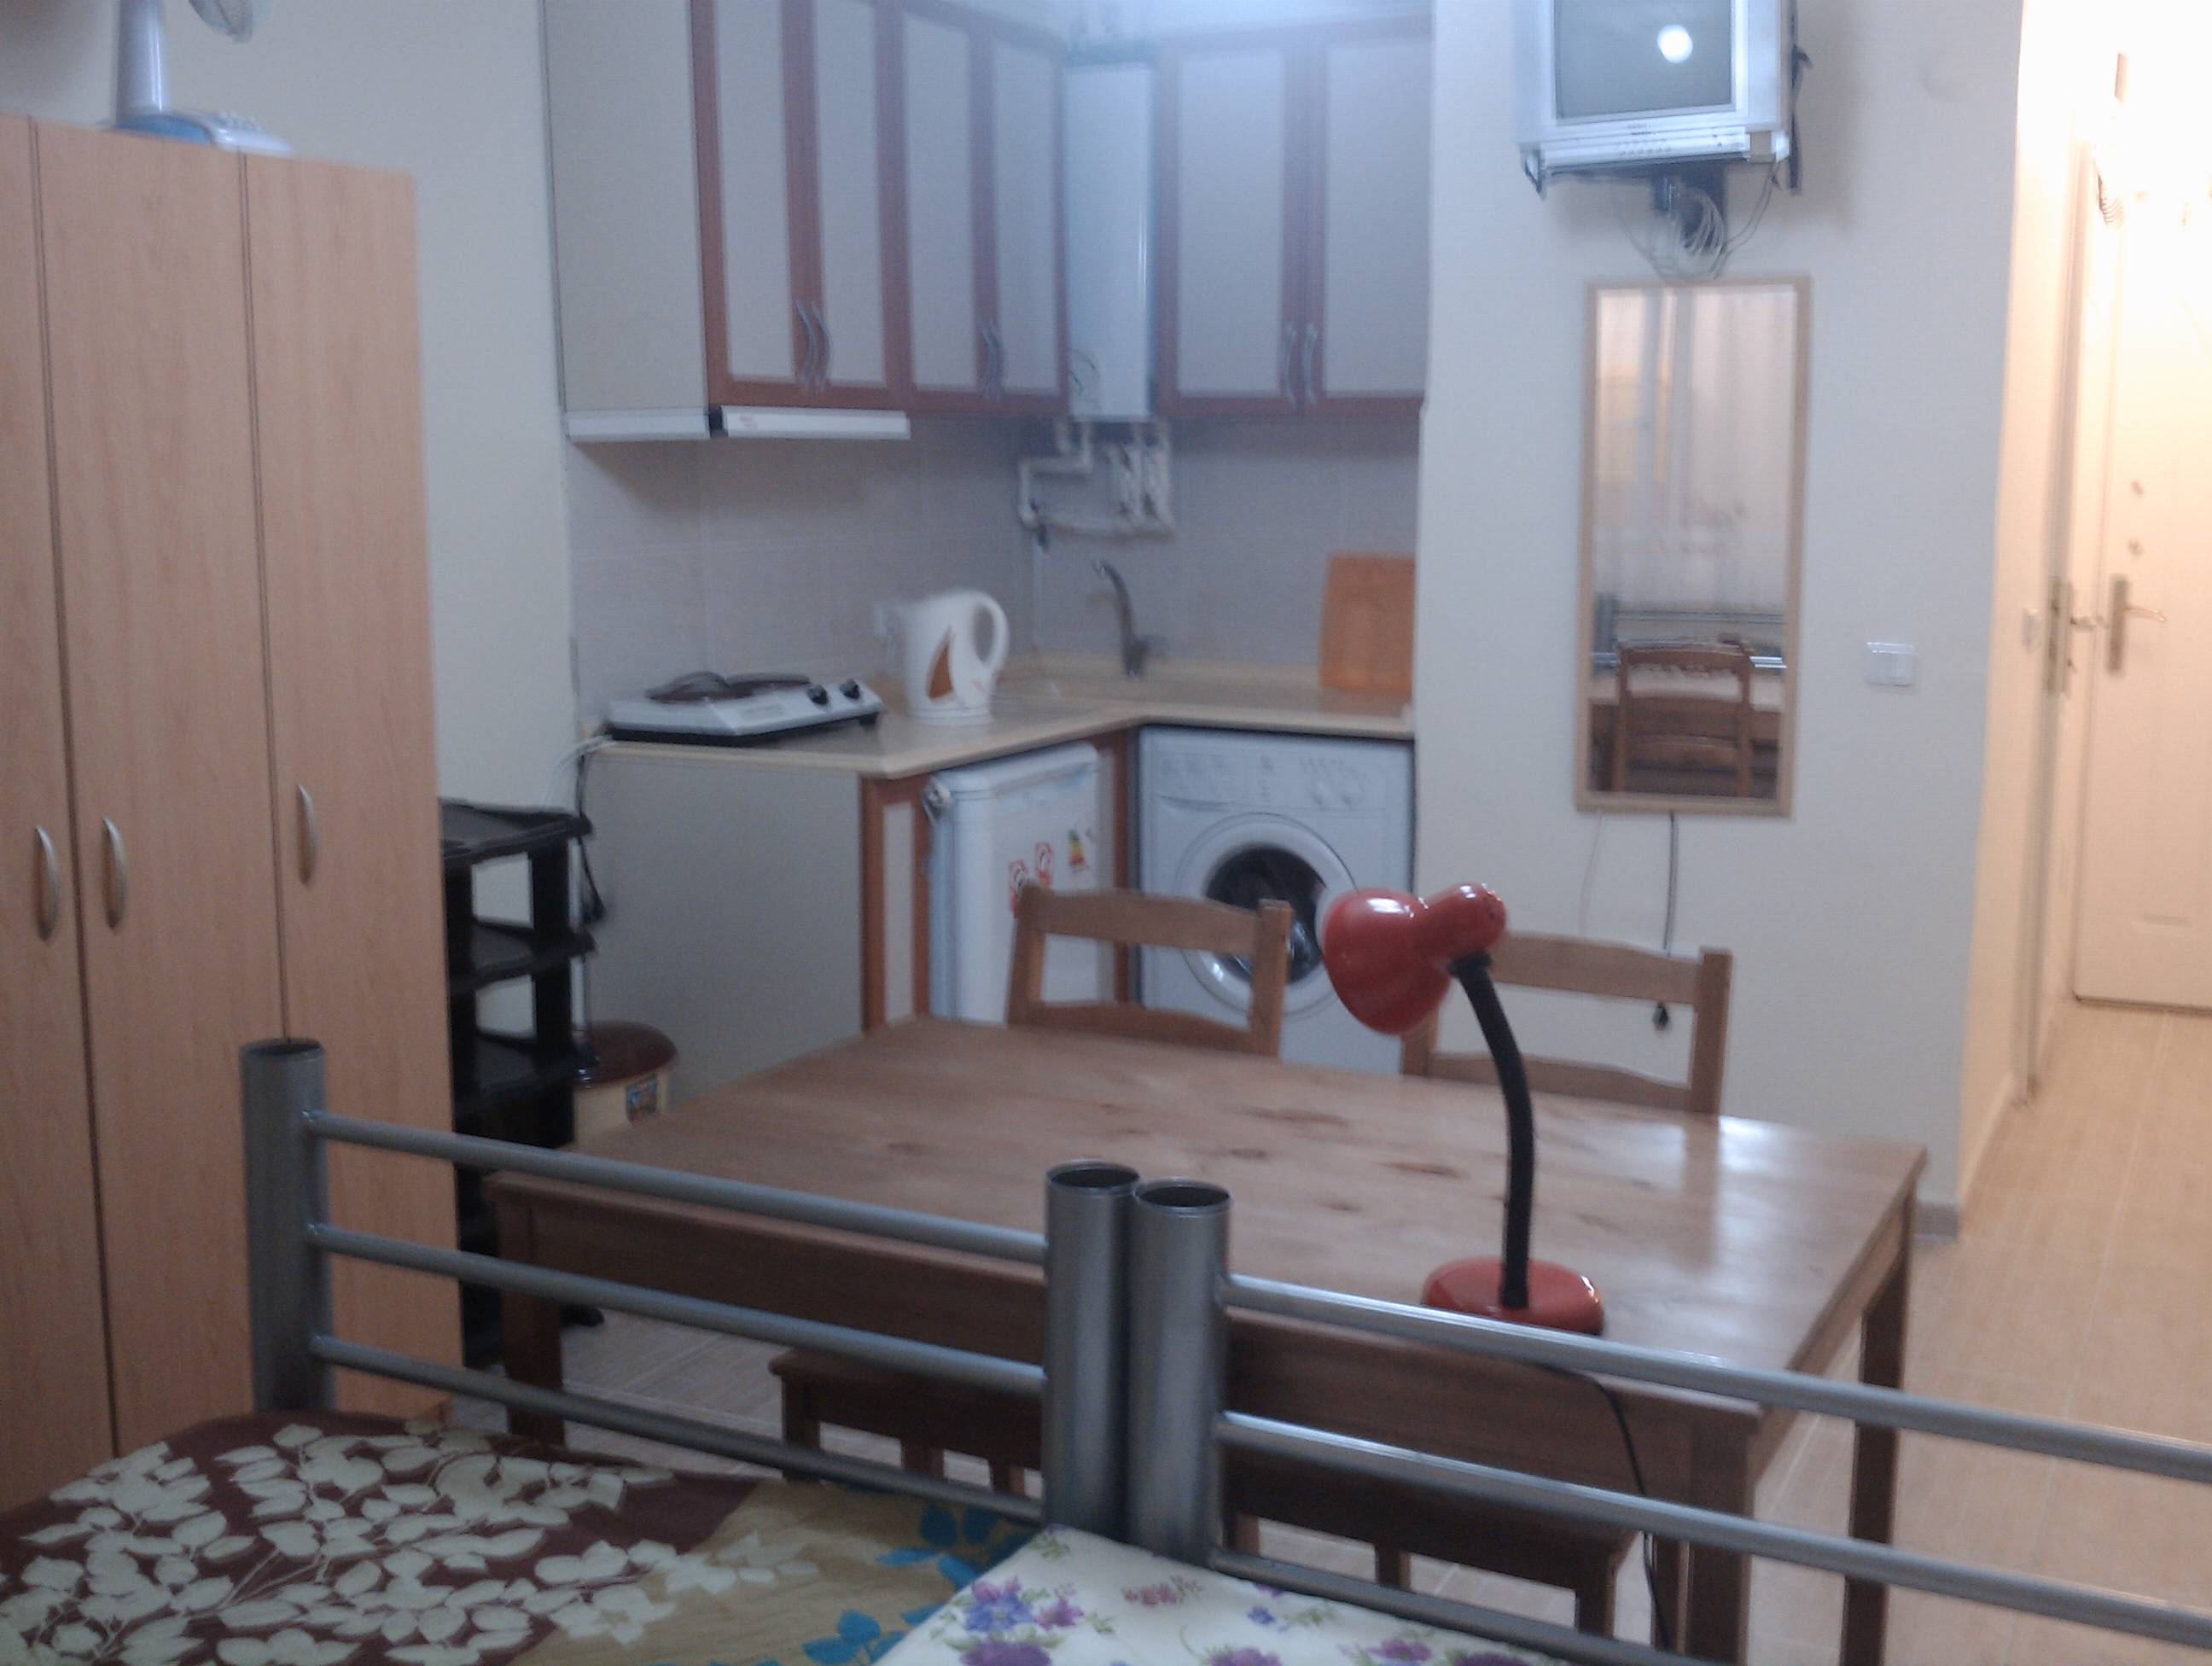 Flat Available Now Flat 5171 Furnished One Room Studio Apartment For Rent Near Taksim Erasmus Istanbul Housing Rooms In Flatshare Or Individual Flats